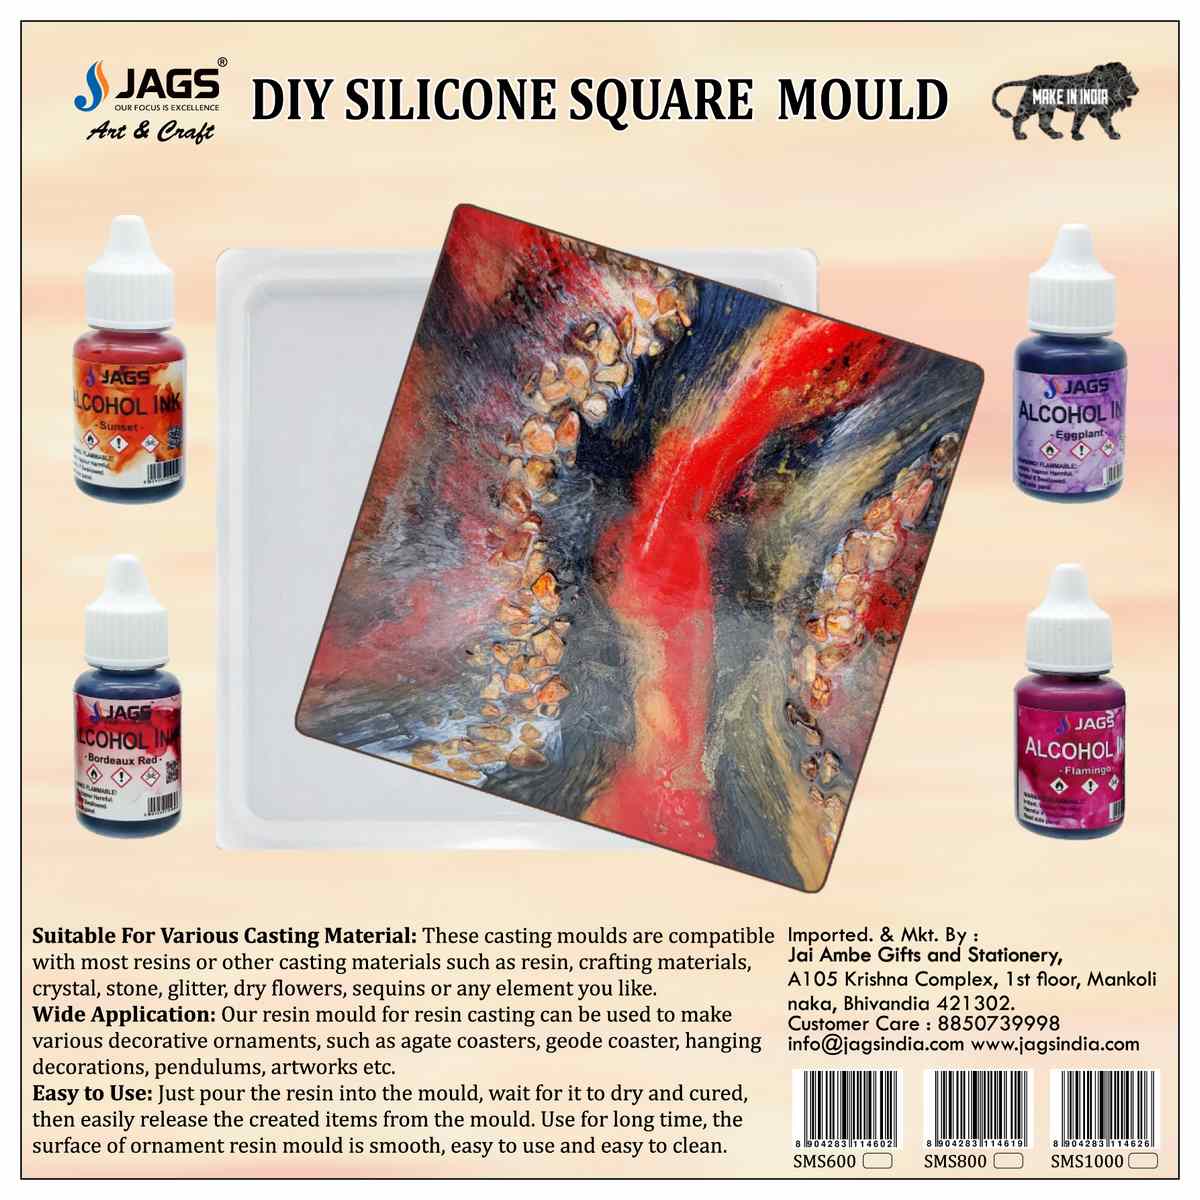 jags-mumbai Mould Silicone Mould Square 8 Inch SMS800